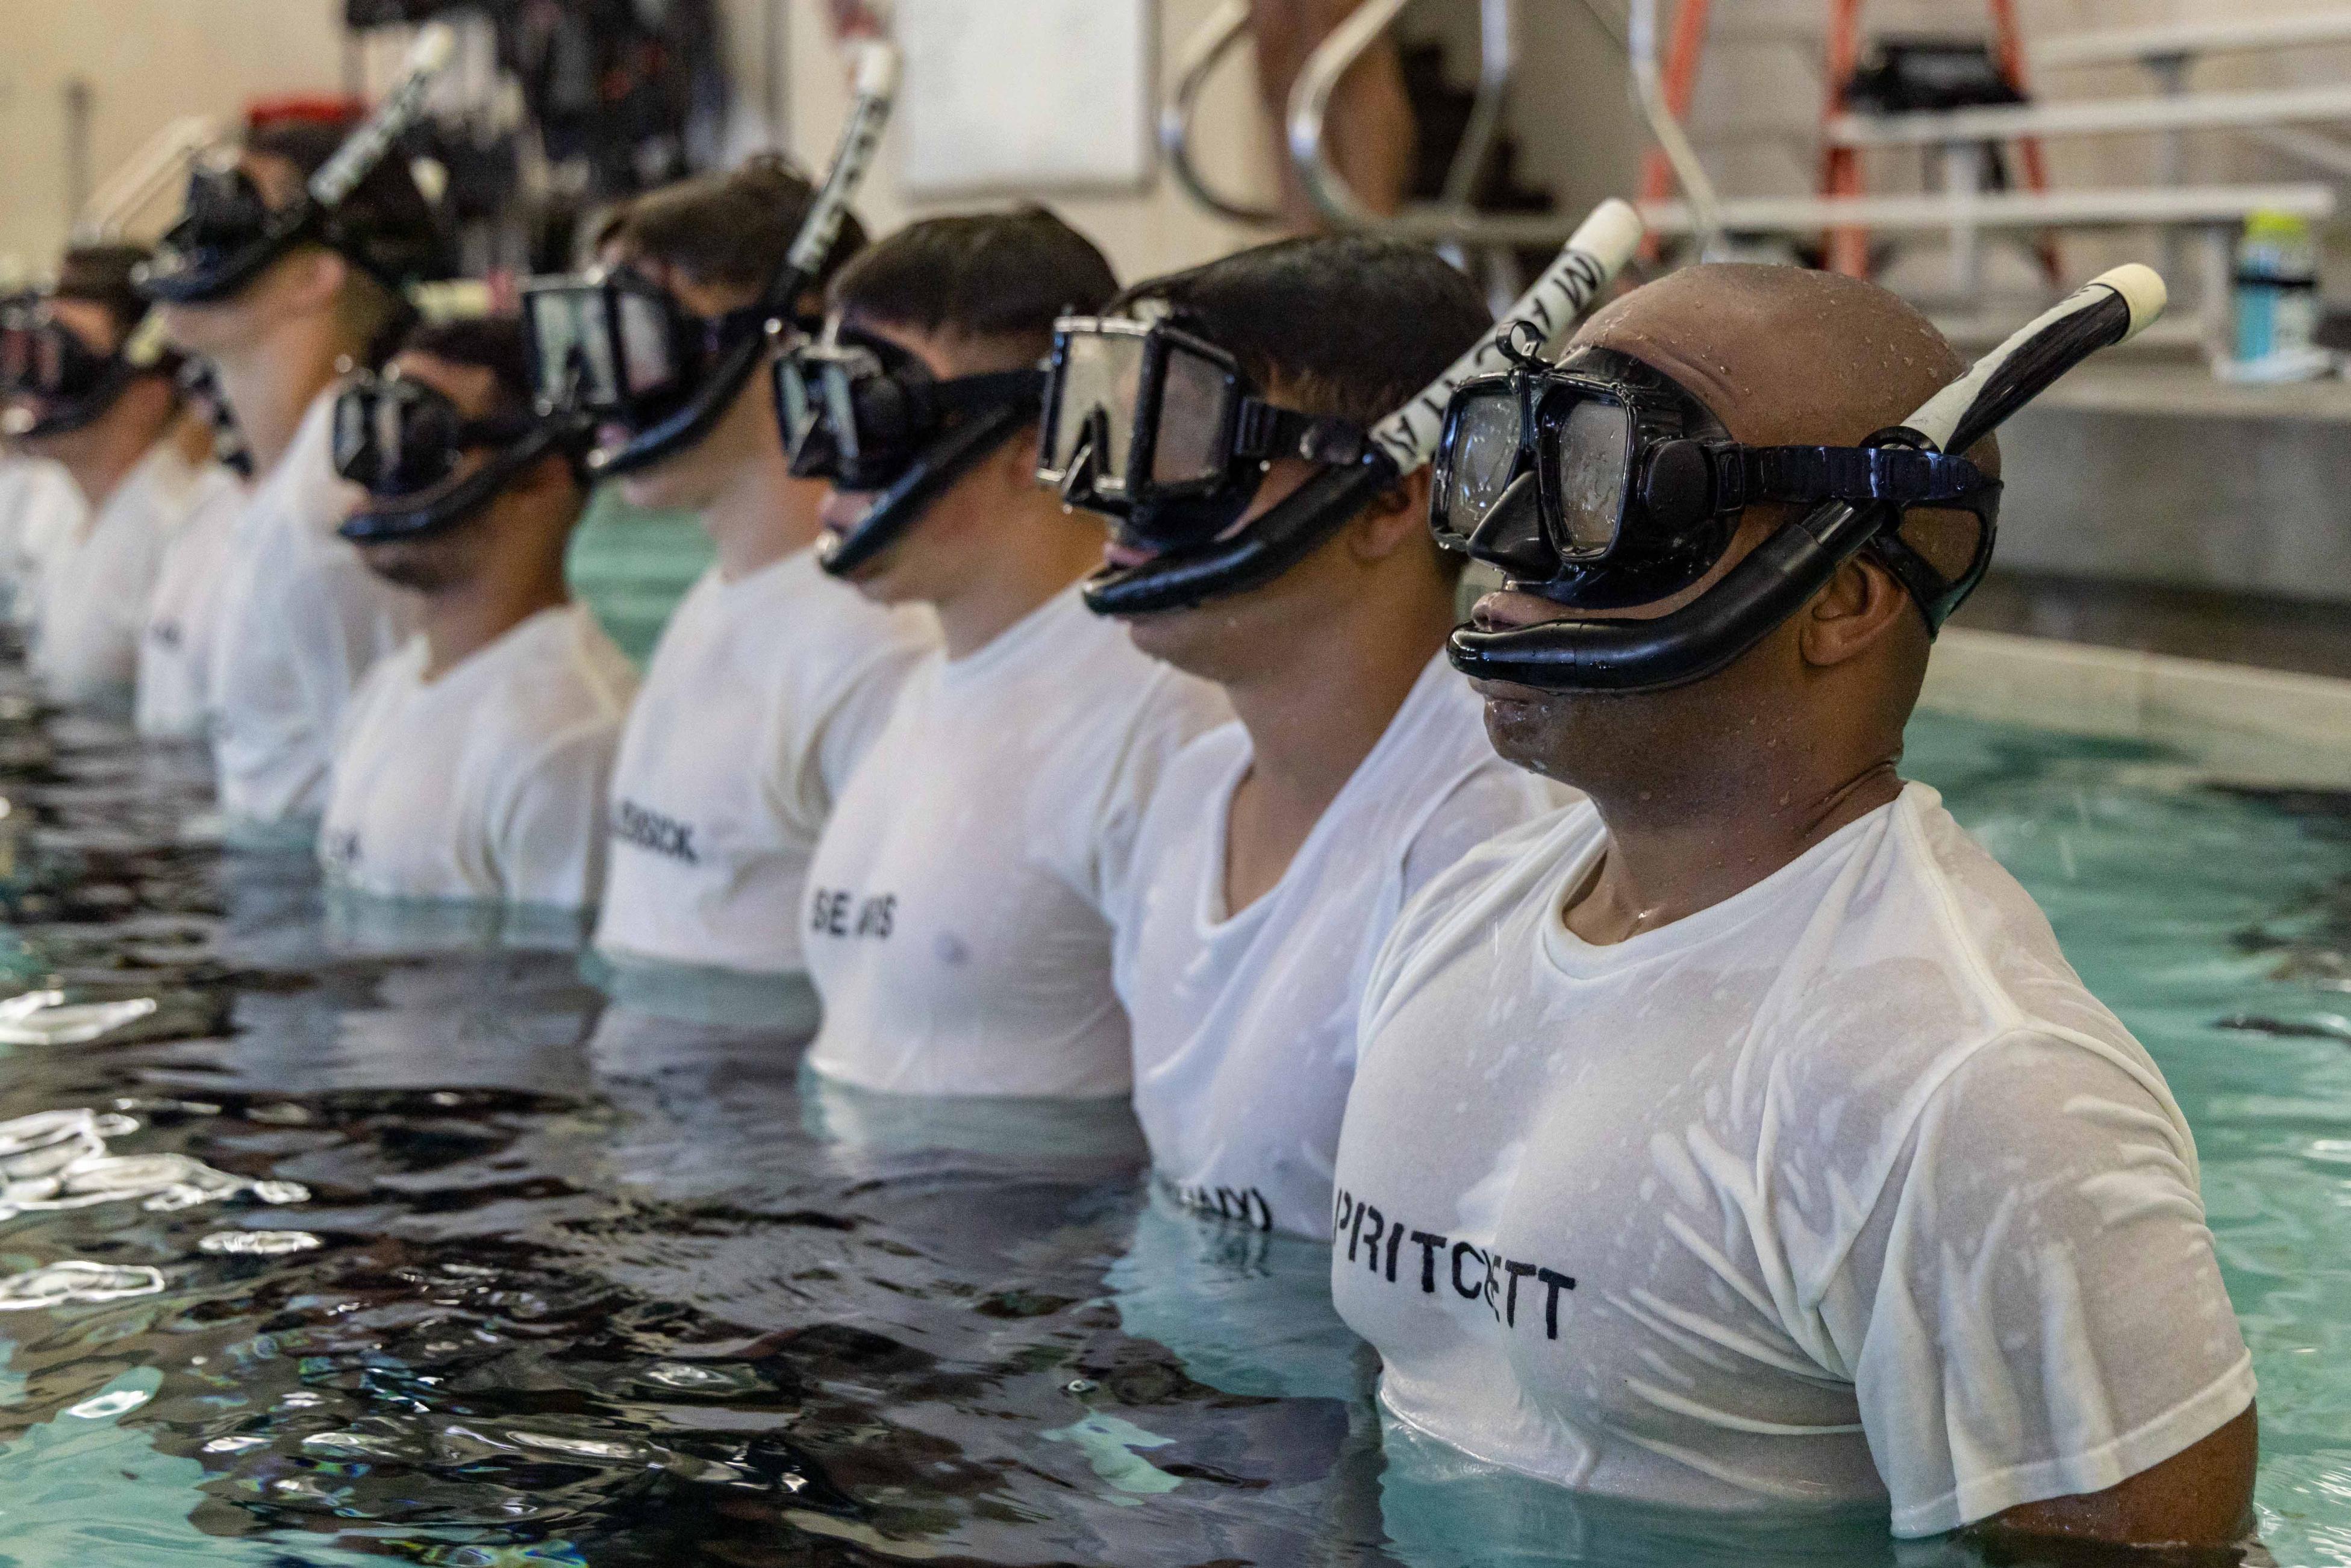 Sailors assigned to Naval Aviation Schools Command (NASC) stand in formation during the Aviation Rescue Swimmer School Preparatory Course in Pensacola, Florida, June 21, 2023. NASC is one of the more than 1,640 subordinate learning sites that serve as a part of the Naval Education and Training Command (NETC) domain.